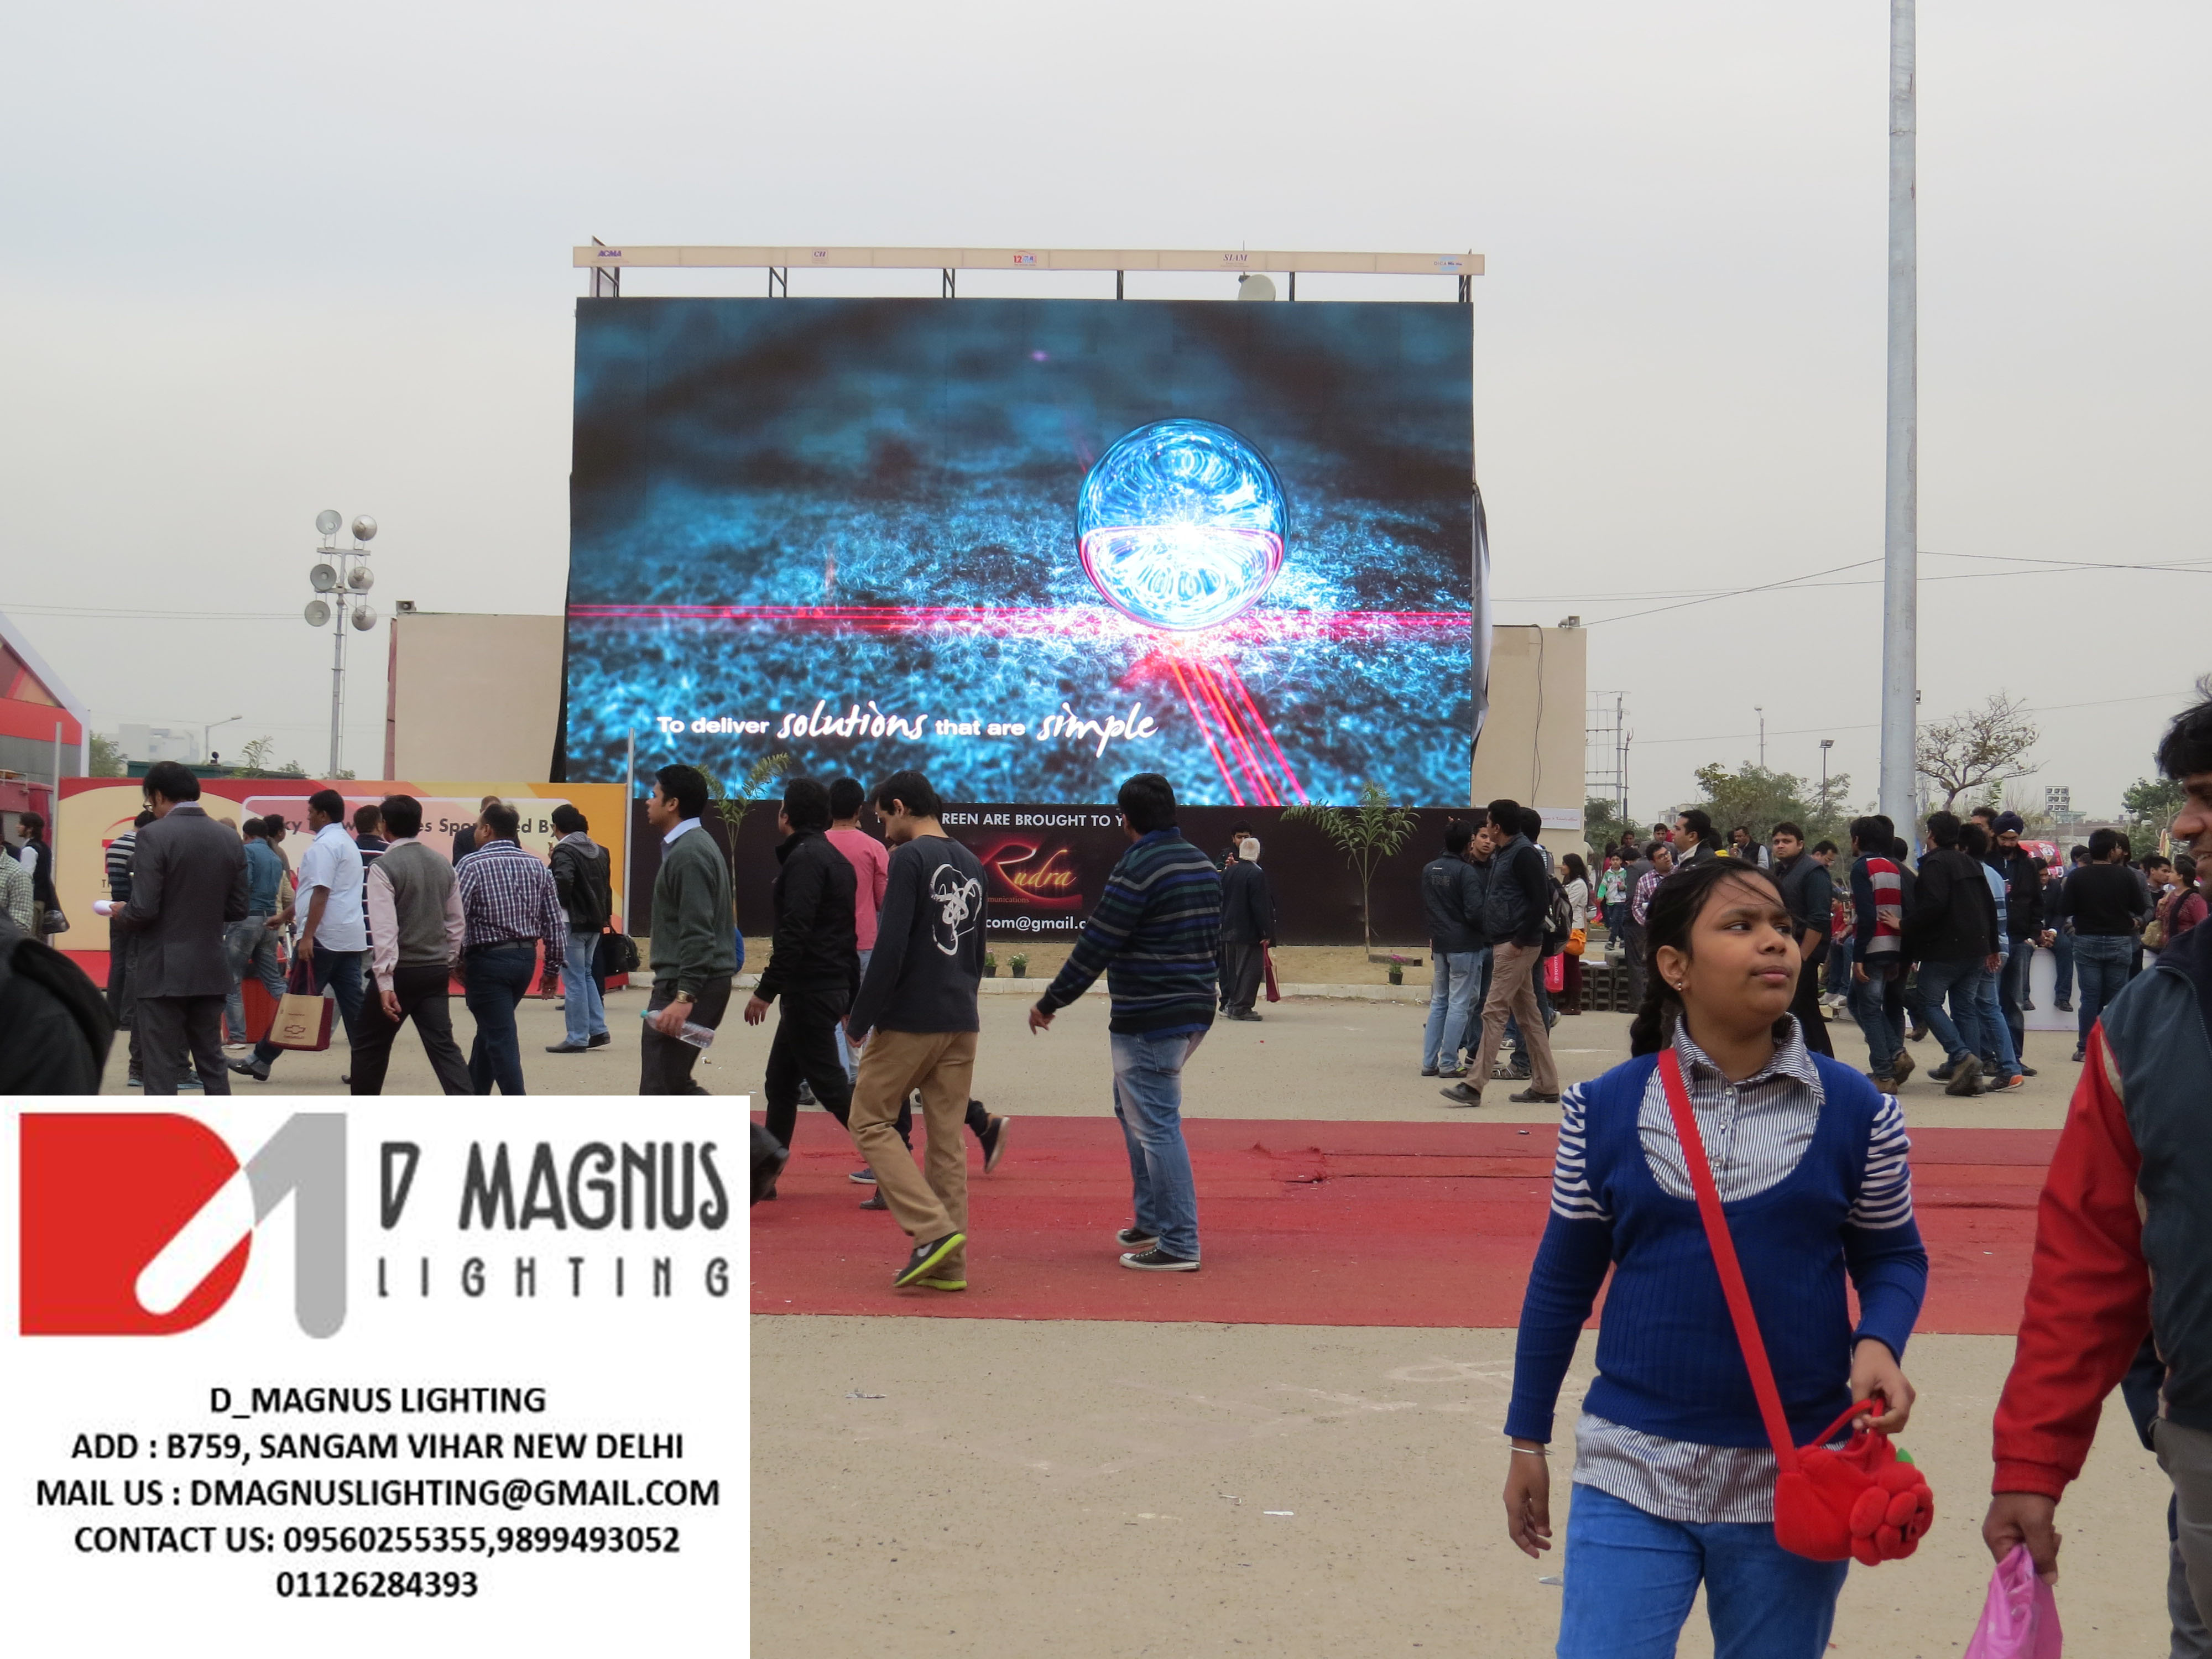 OUTDOOR LED SCREEN RENTEventsExhibitions - Trade FairsSouth DelhiEast of Kailash